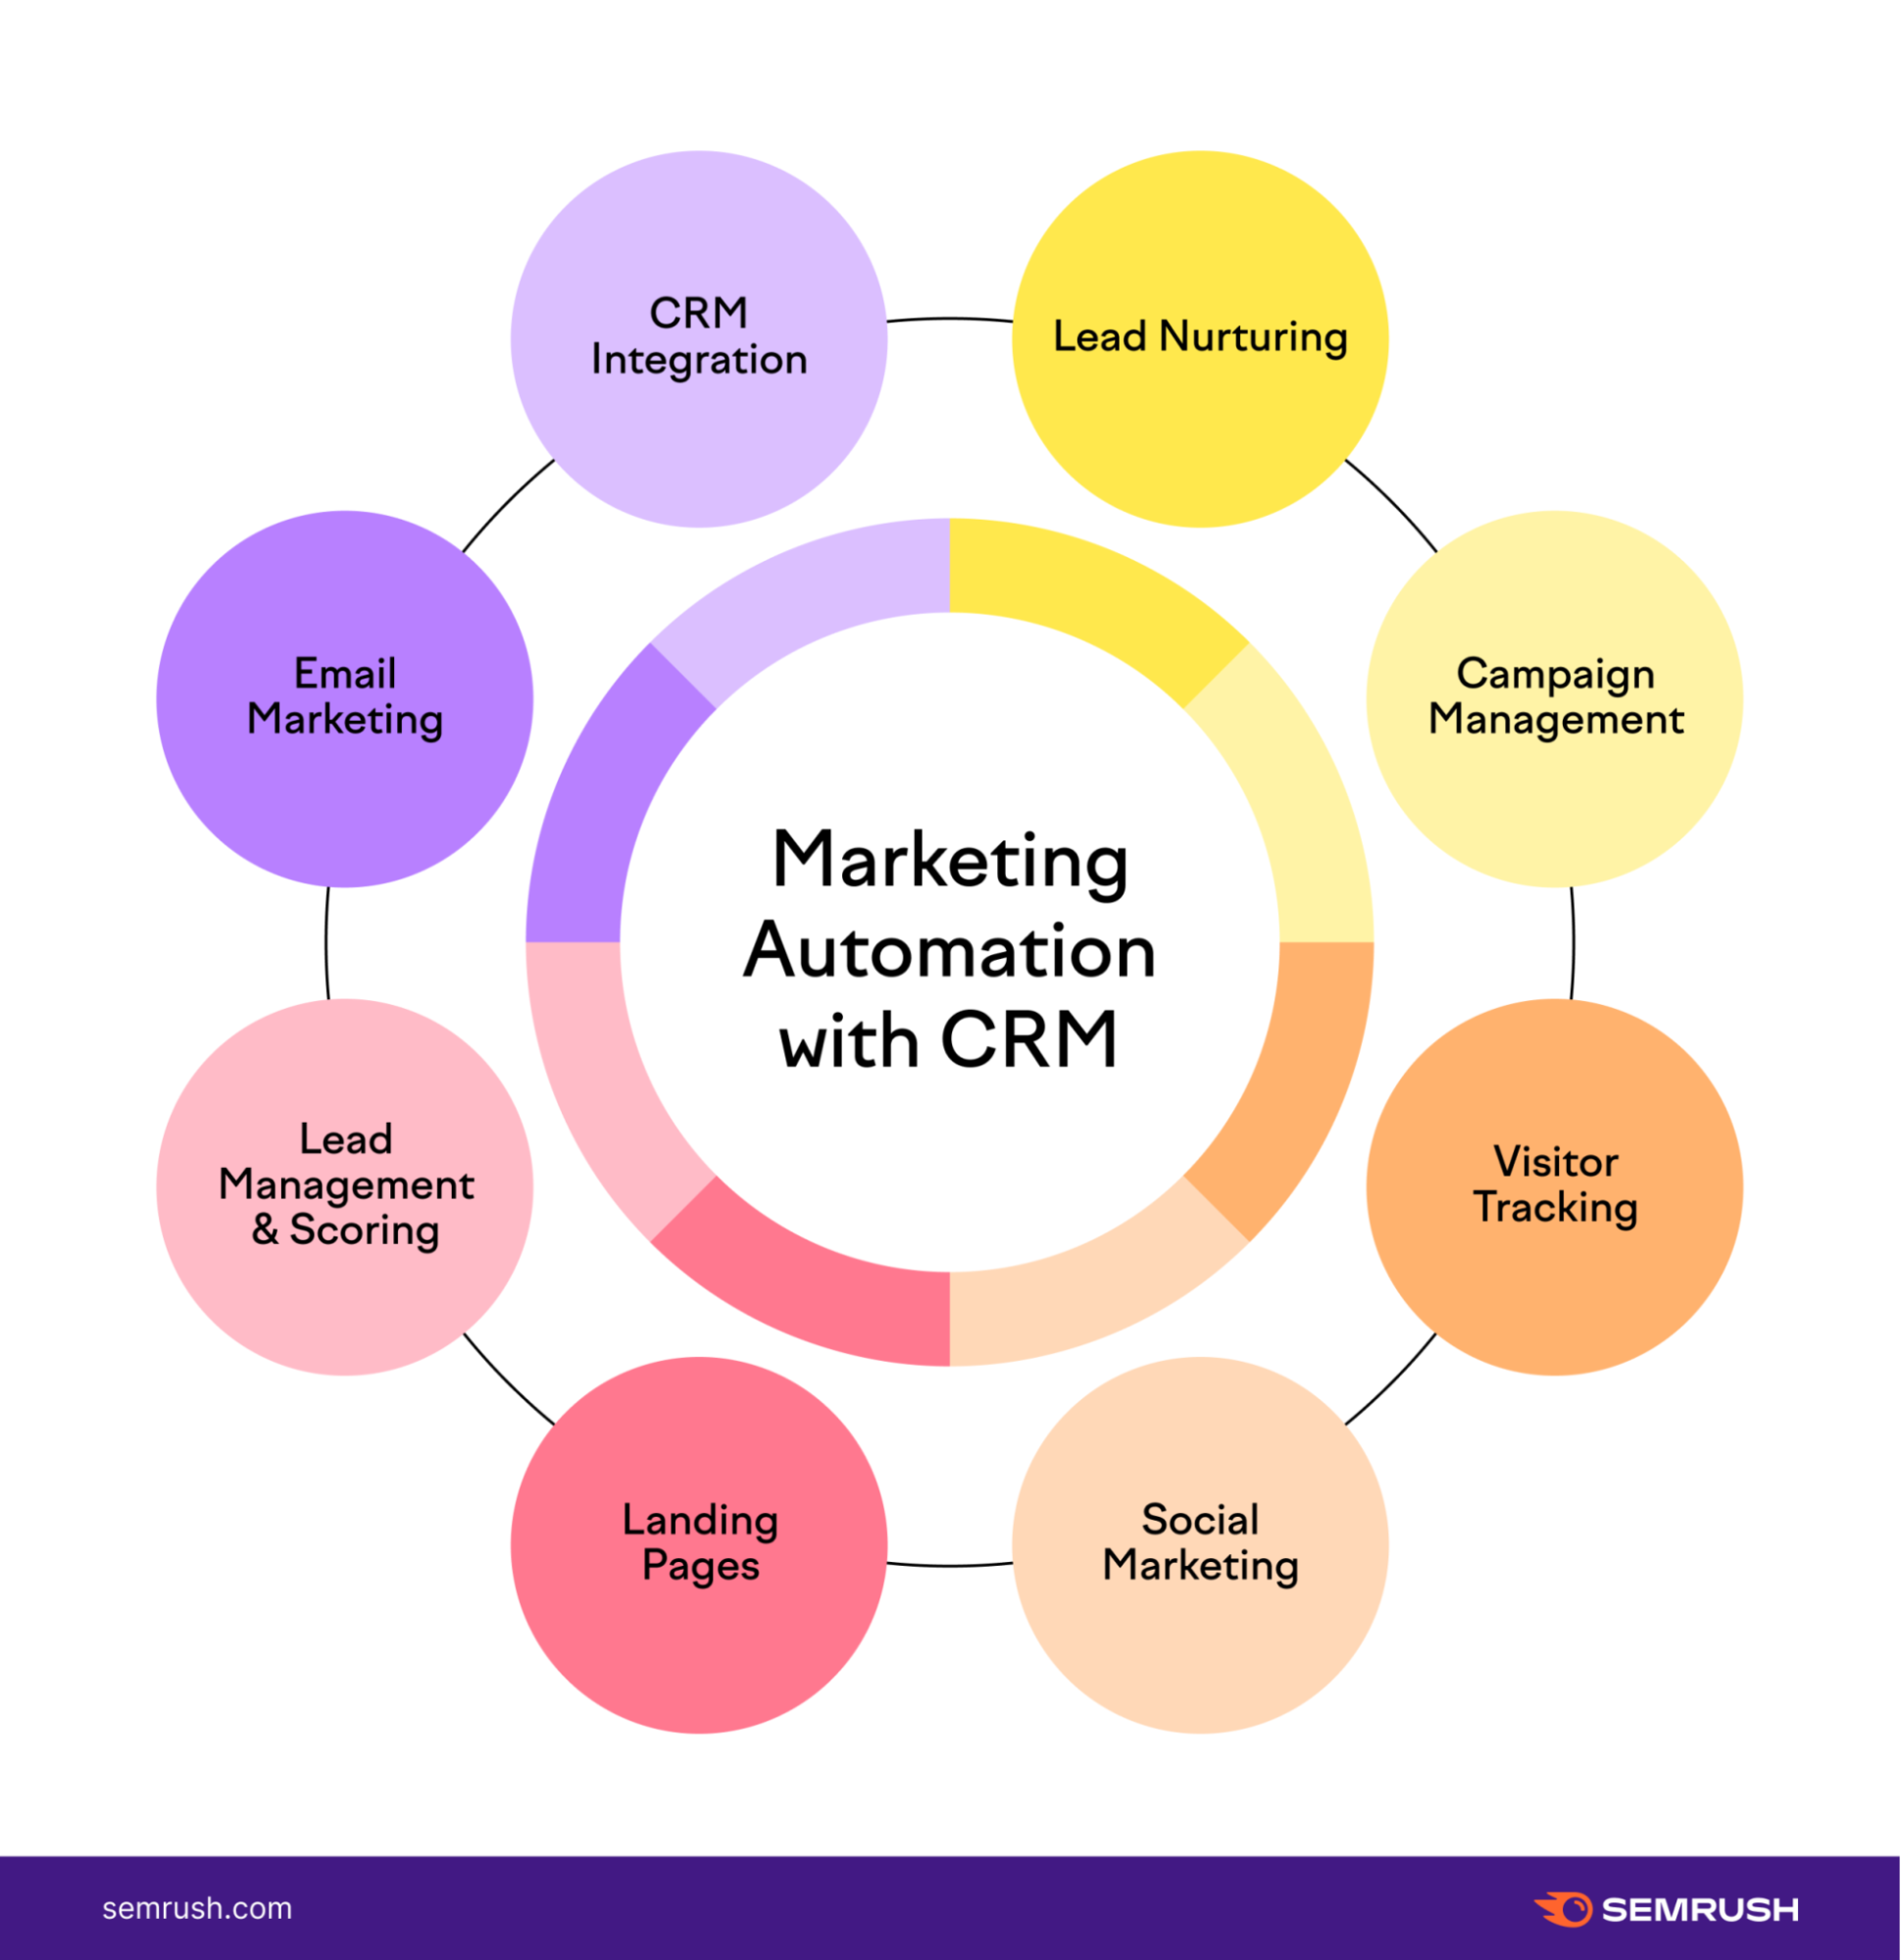 CRM marketing automation helps businesses deliver content, manage campaigns, score leads, and track visitors